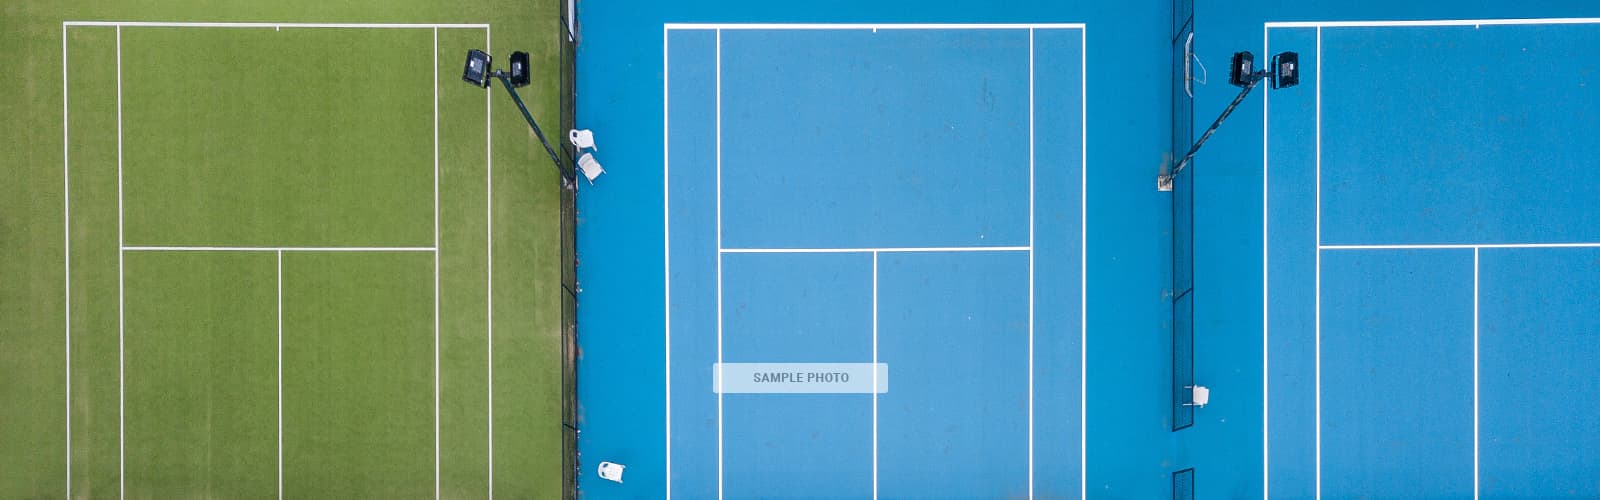 Palm Academy (DEMO) (TESTING PURPOSES ONLY) Tennis Courts in Coronado California